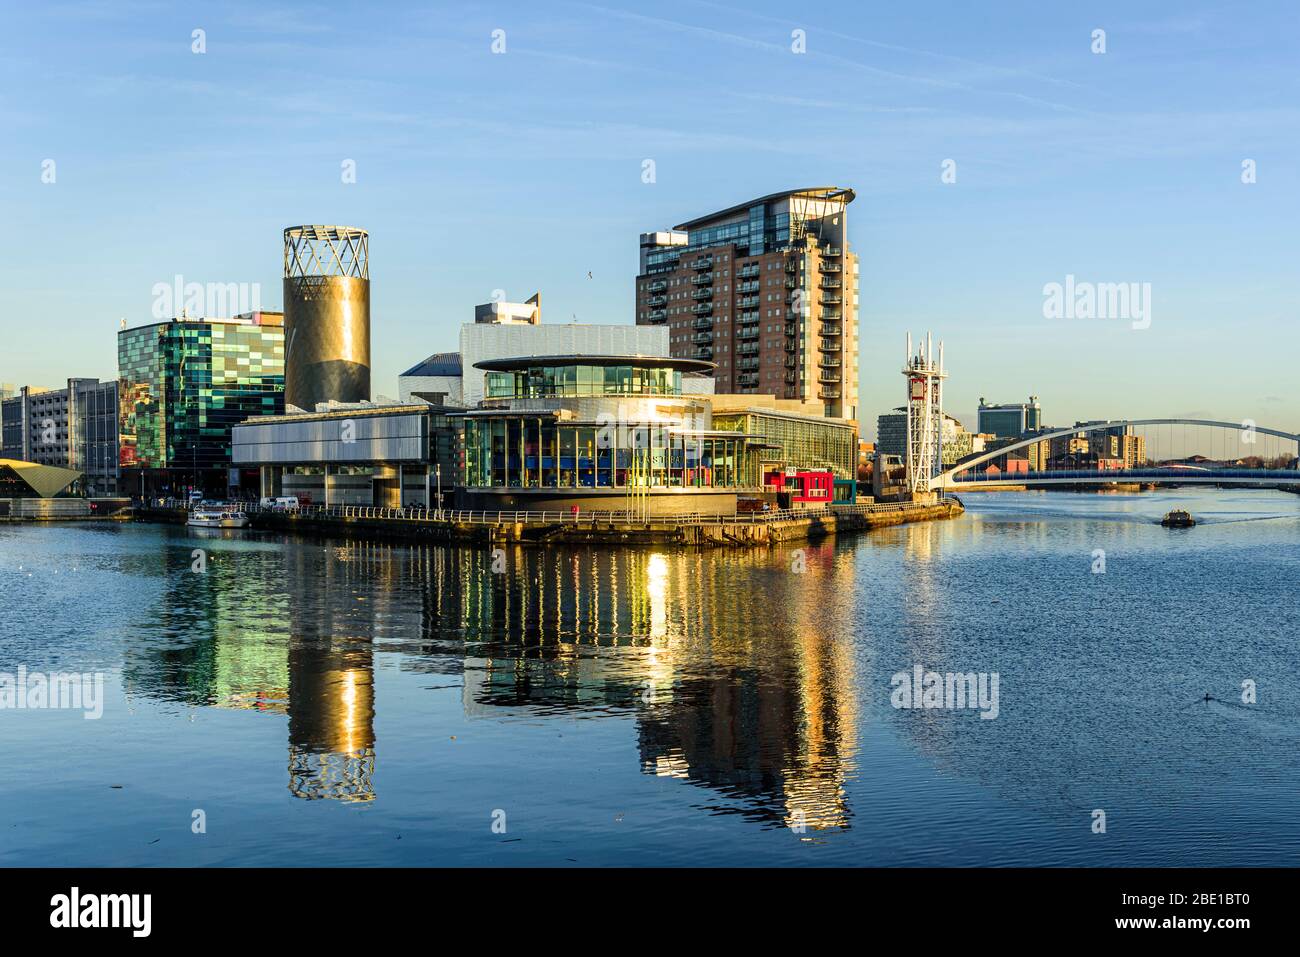 Il ponte di Lowry e Lowry, Salford Quays, Greater Manchester Foto Stock